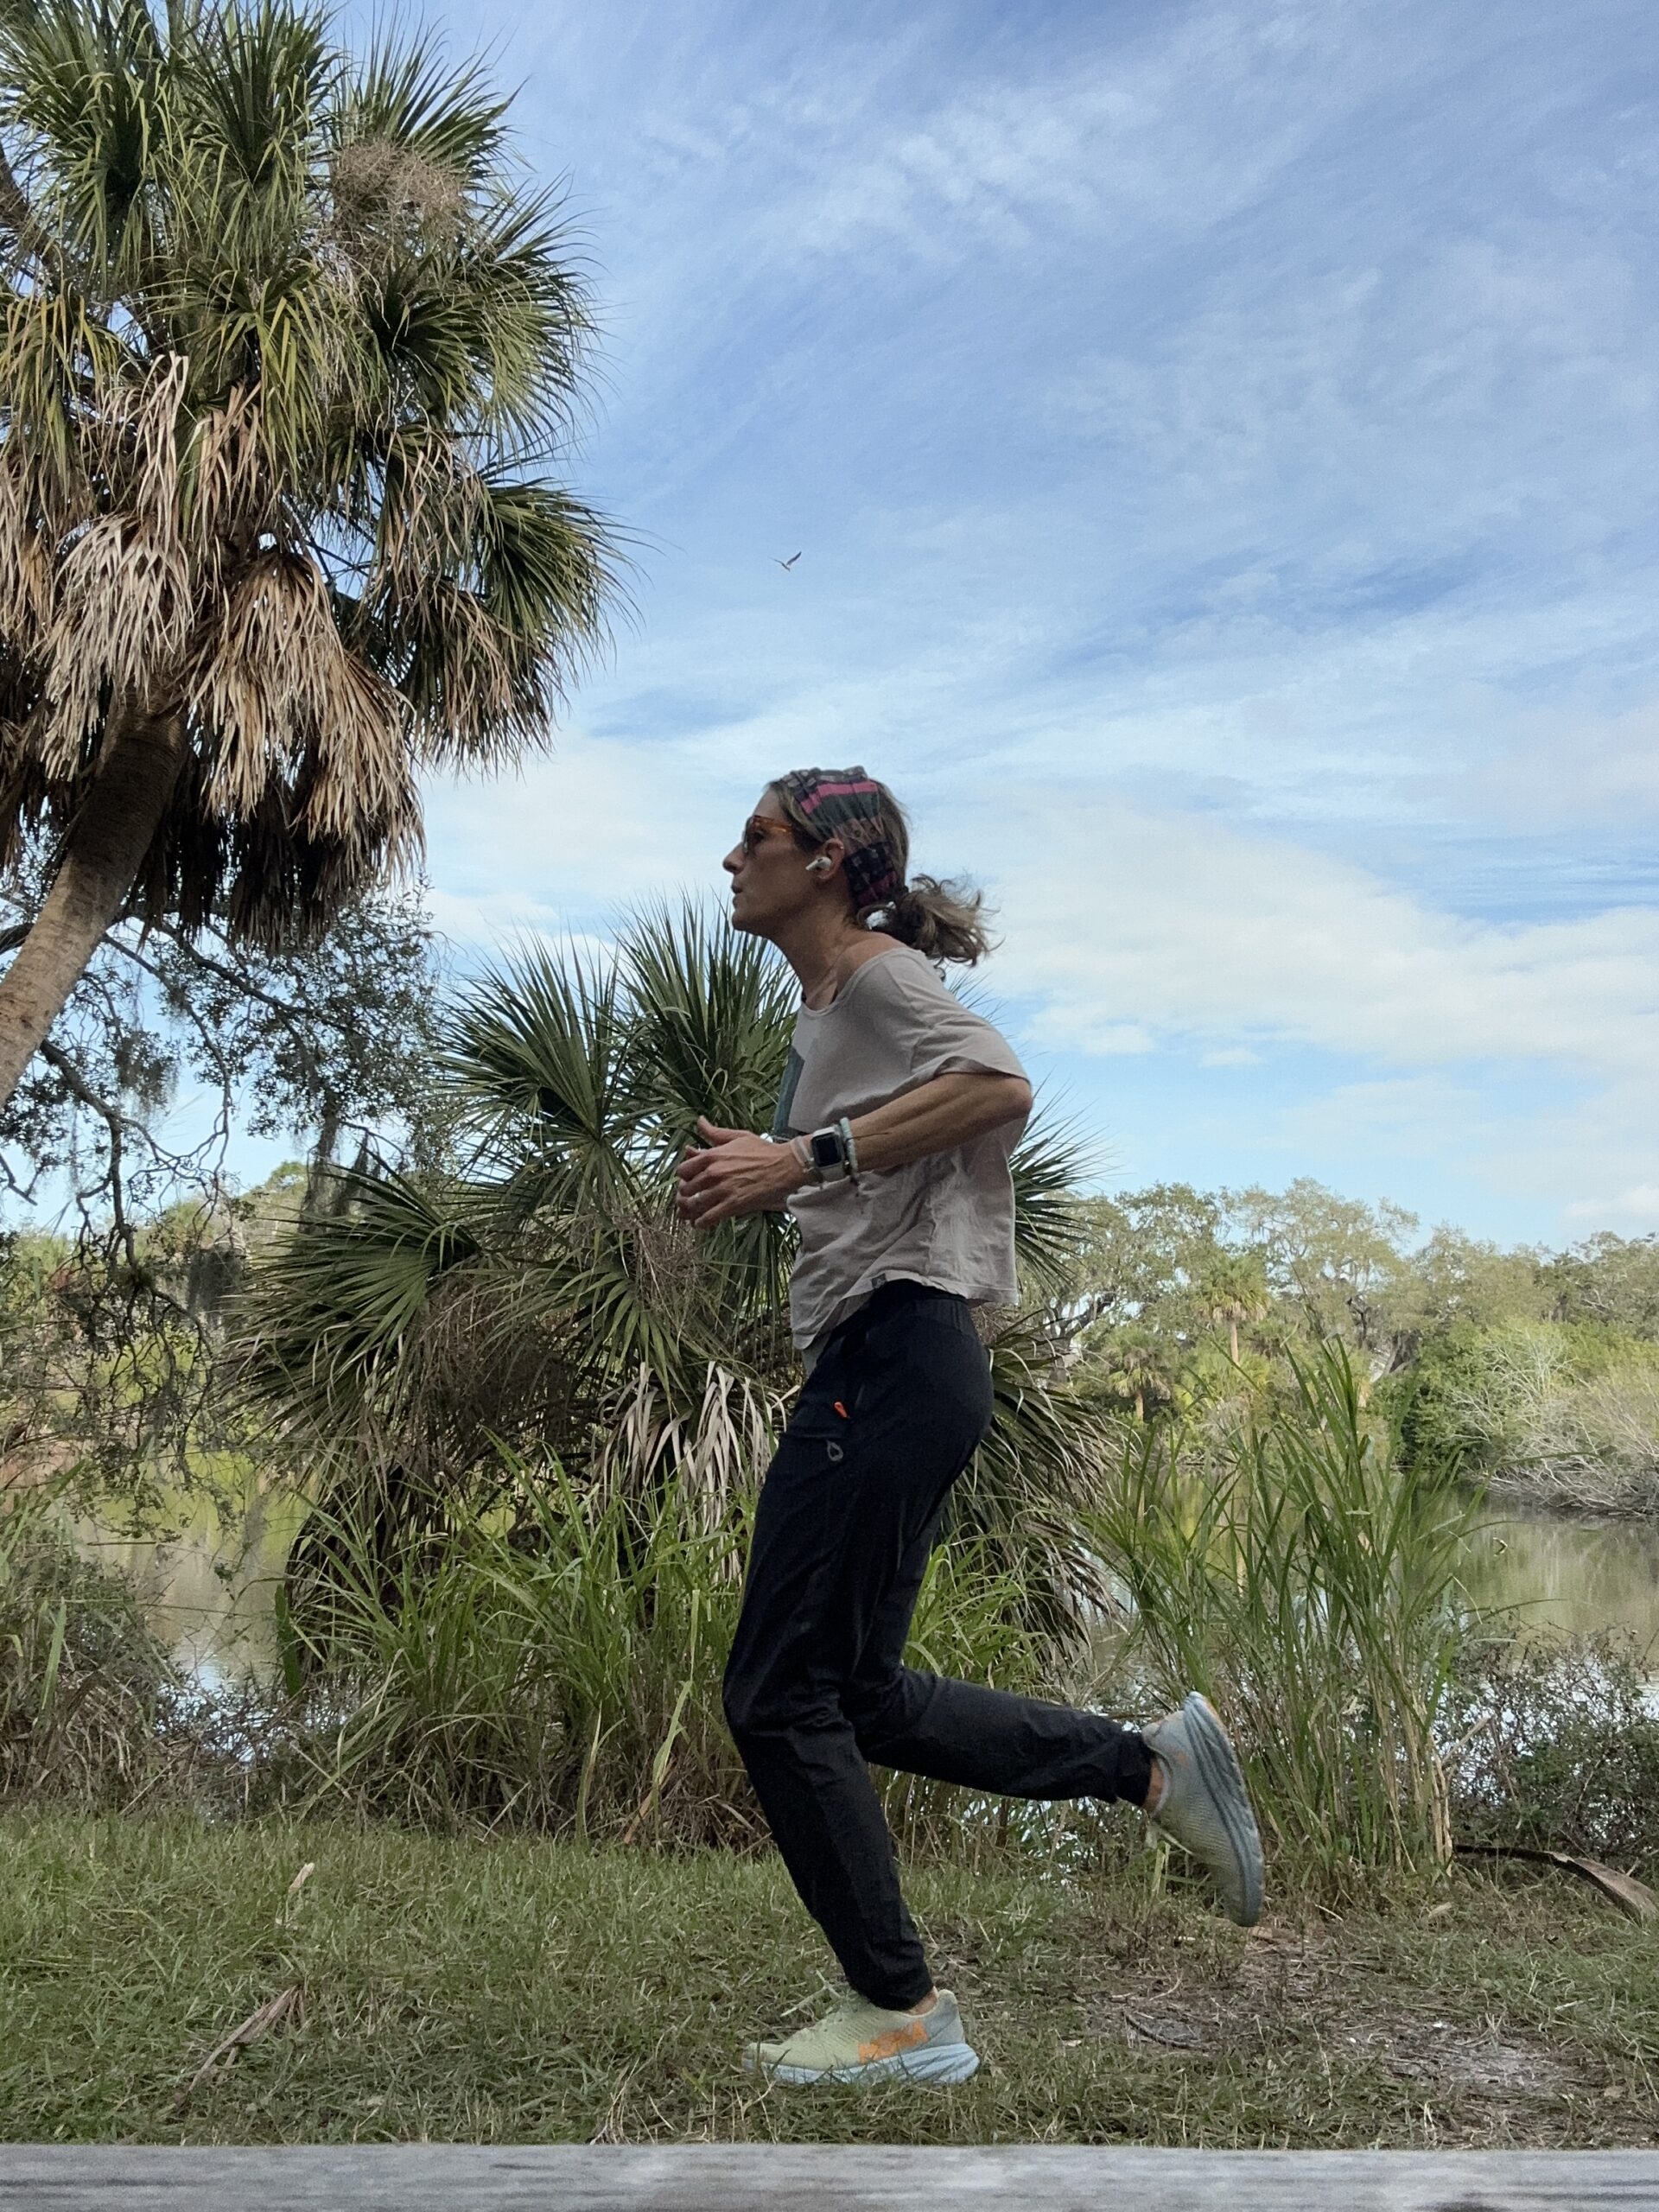 A woman jogging in a park with palm trees.